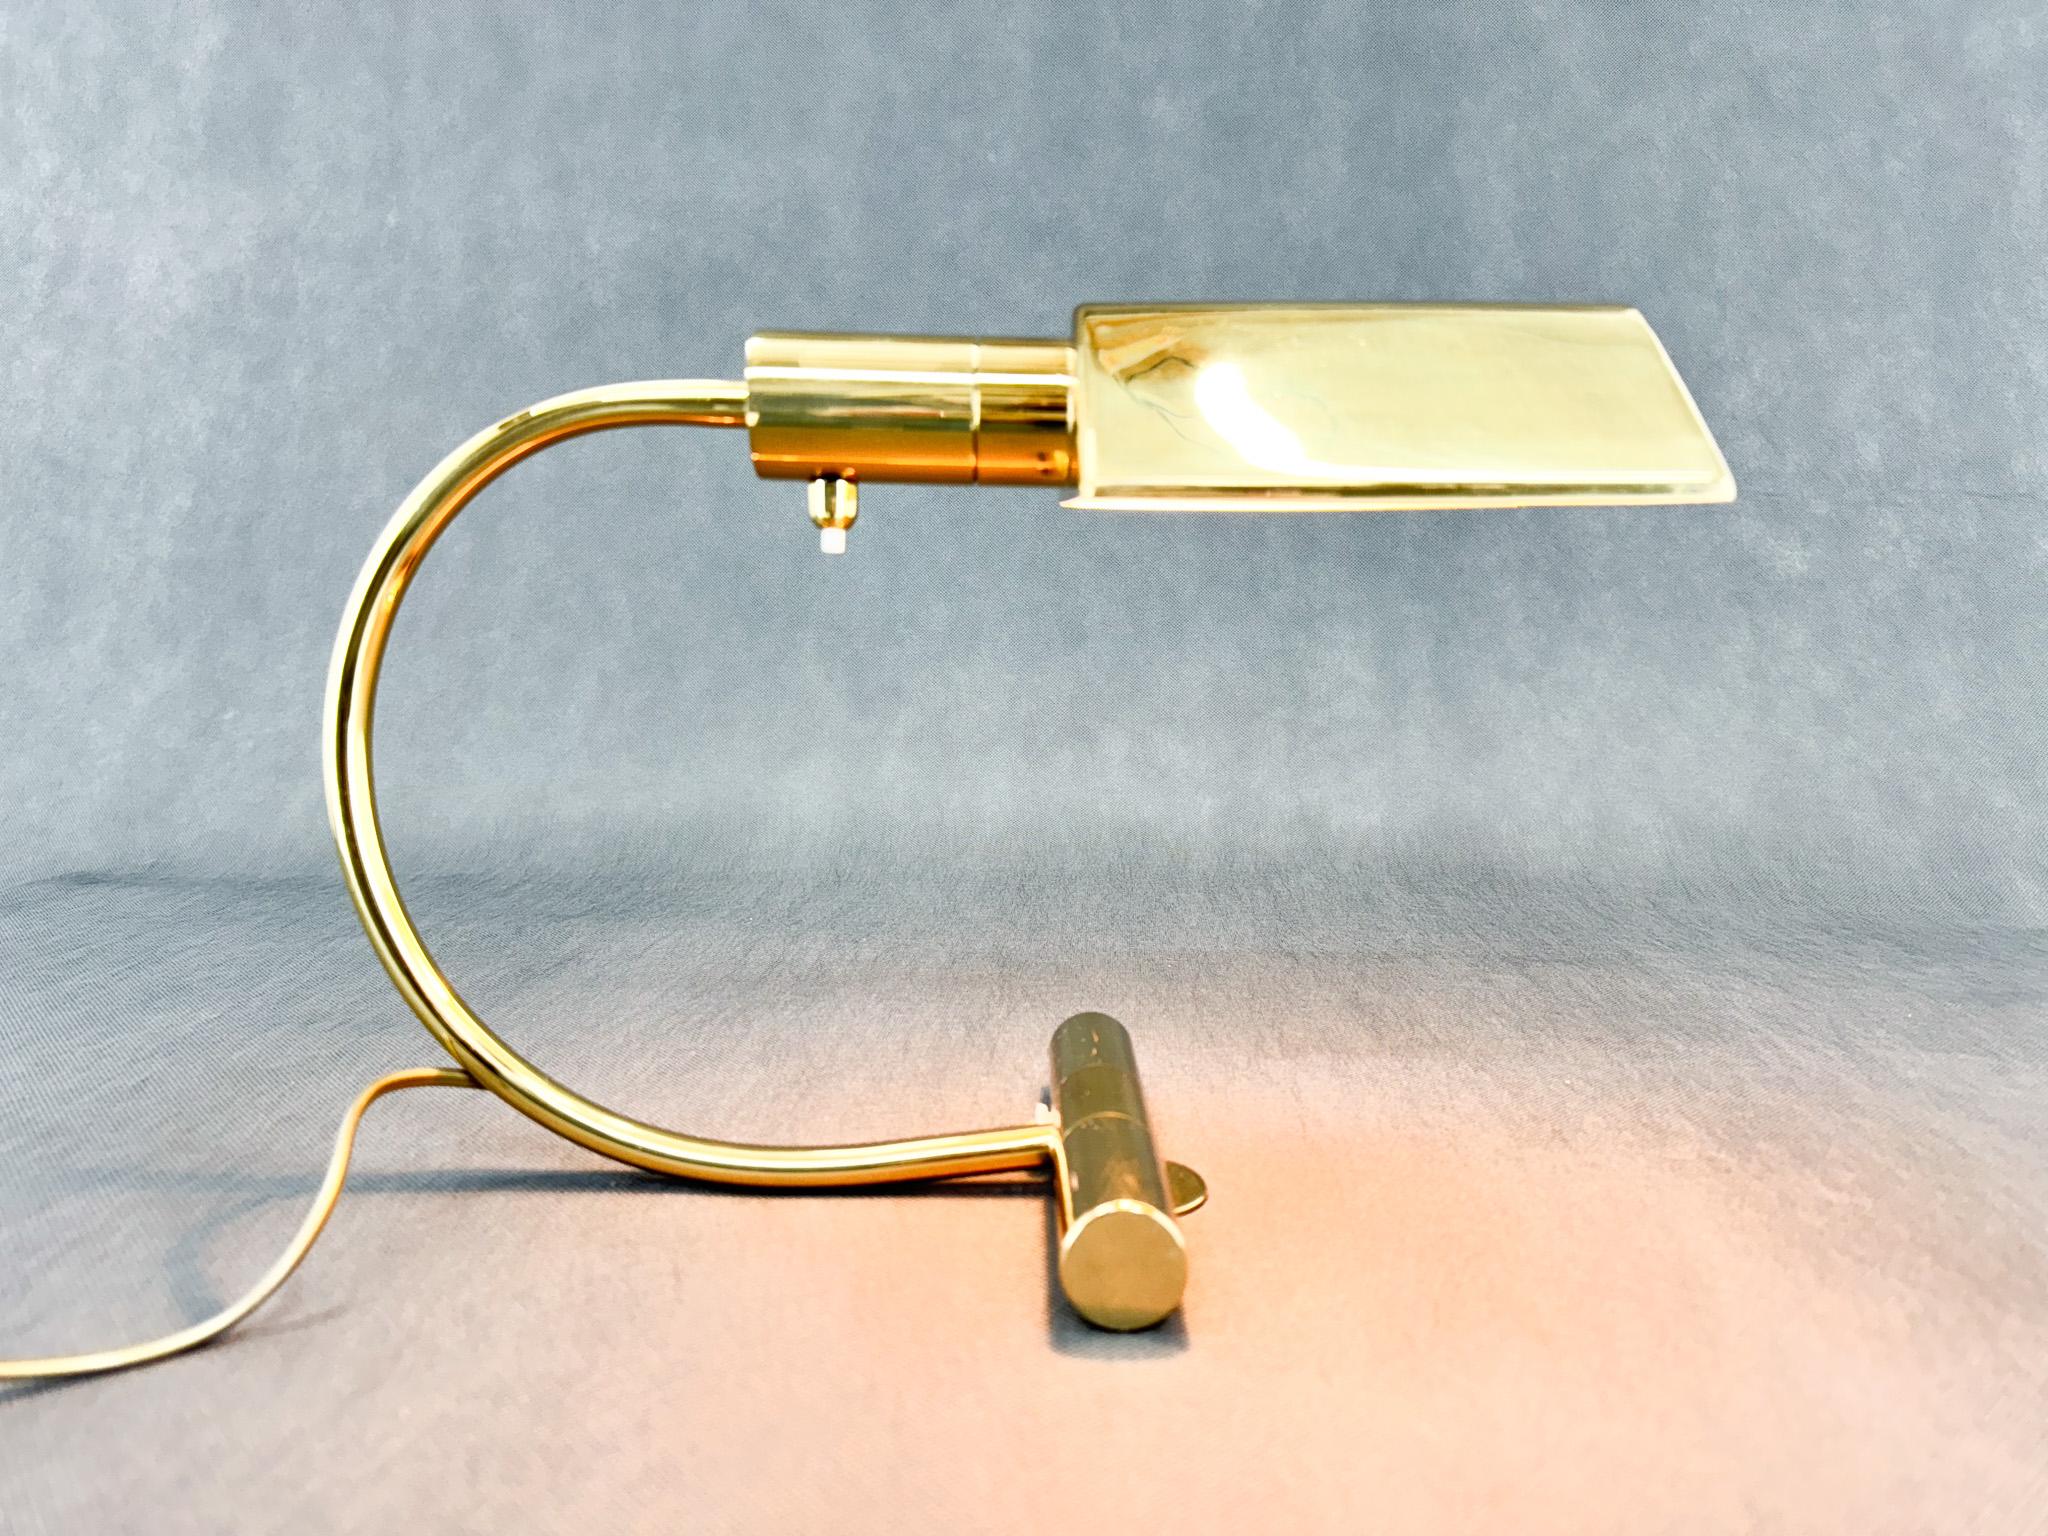 Vintage table or desk lamp made of brassed metal. Produced in Belgium in the 1970's. Bulb: 1 x E14. US adapter included.

